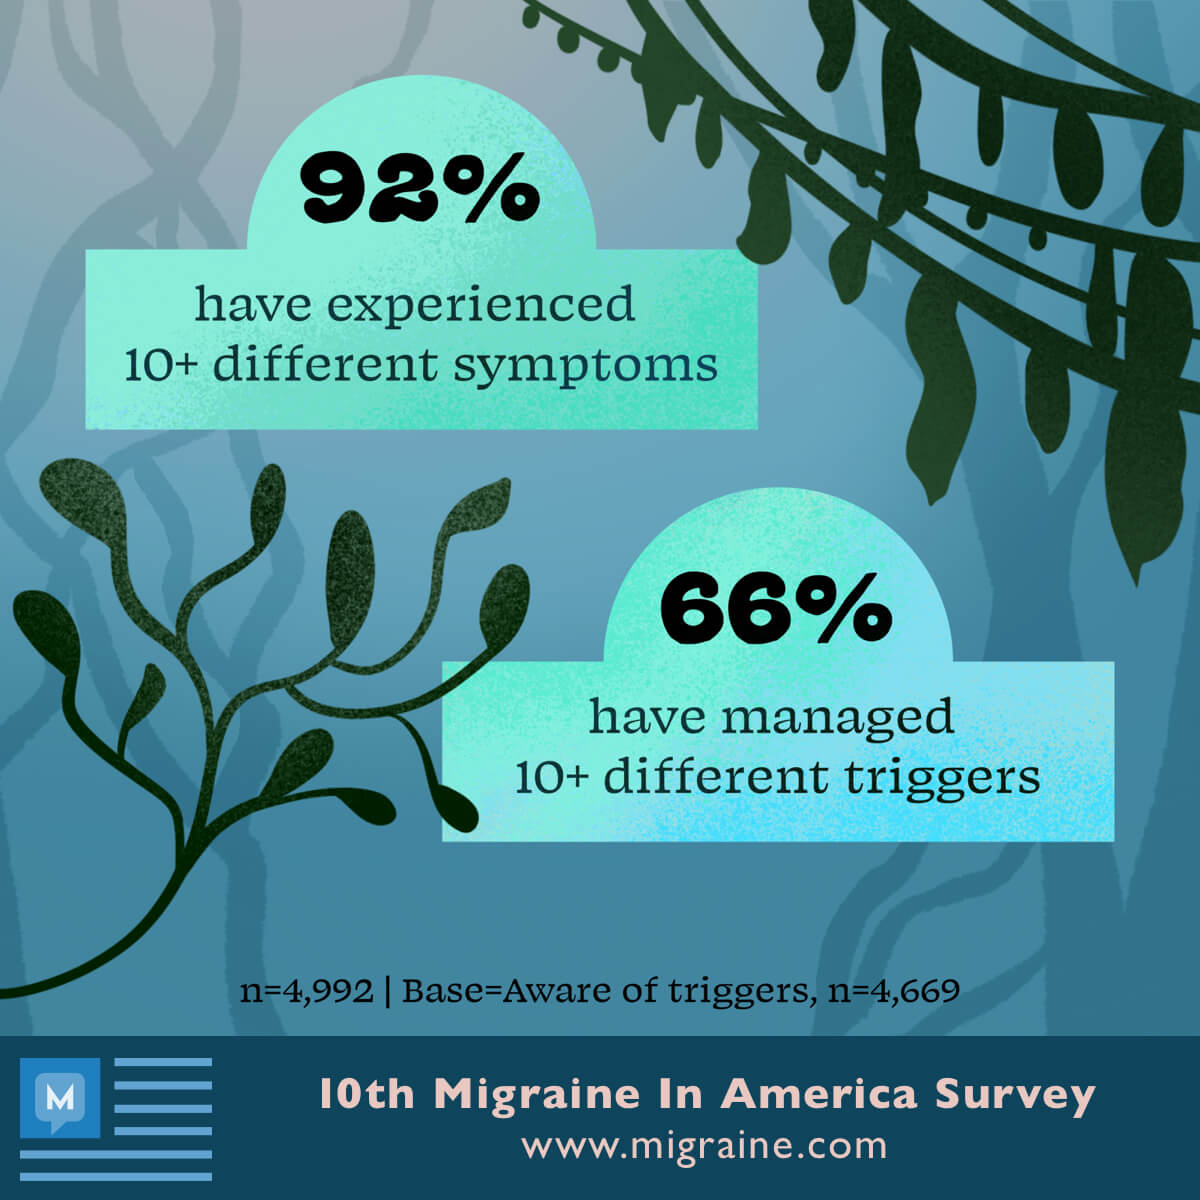 96% of Migraine In America Survey respondents experience 10+ symptoms and 66% manage 10+ triggers.